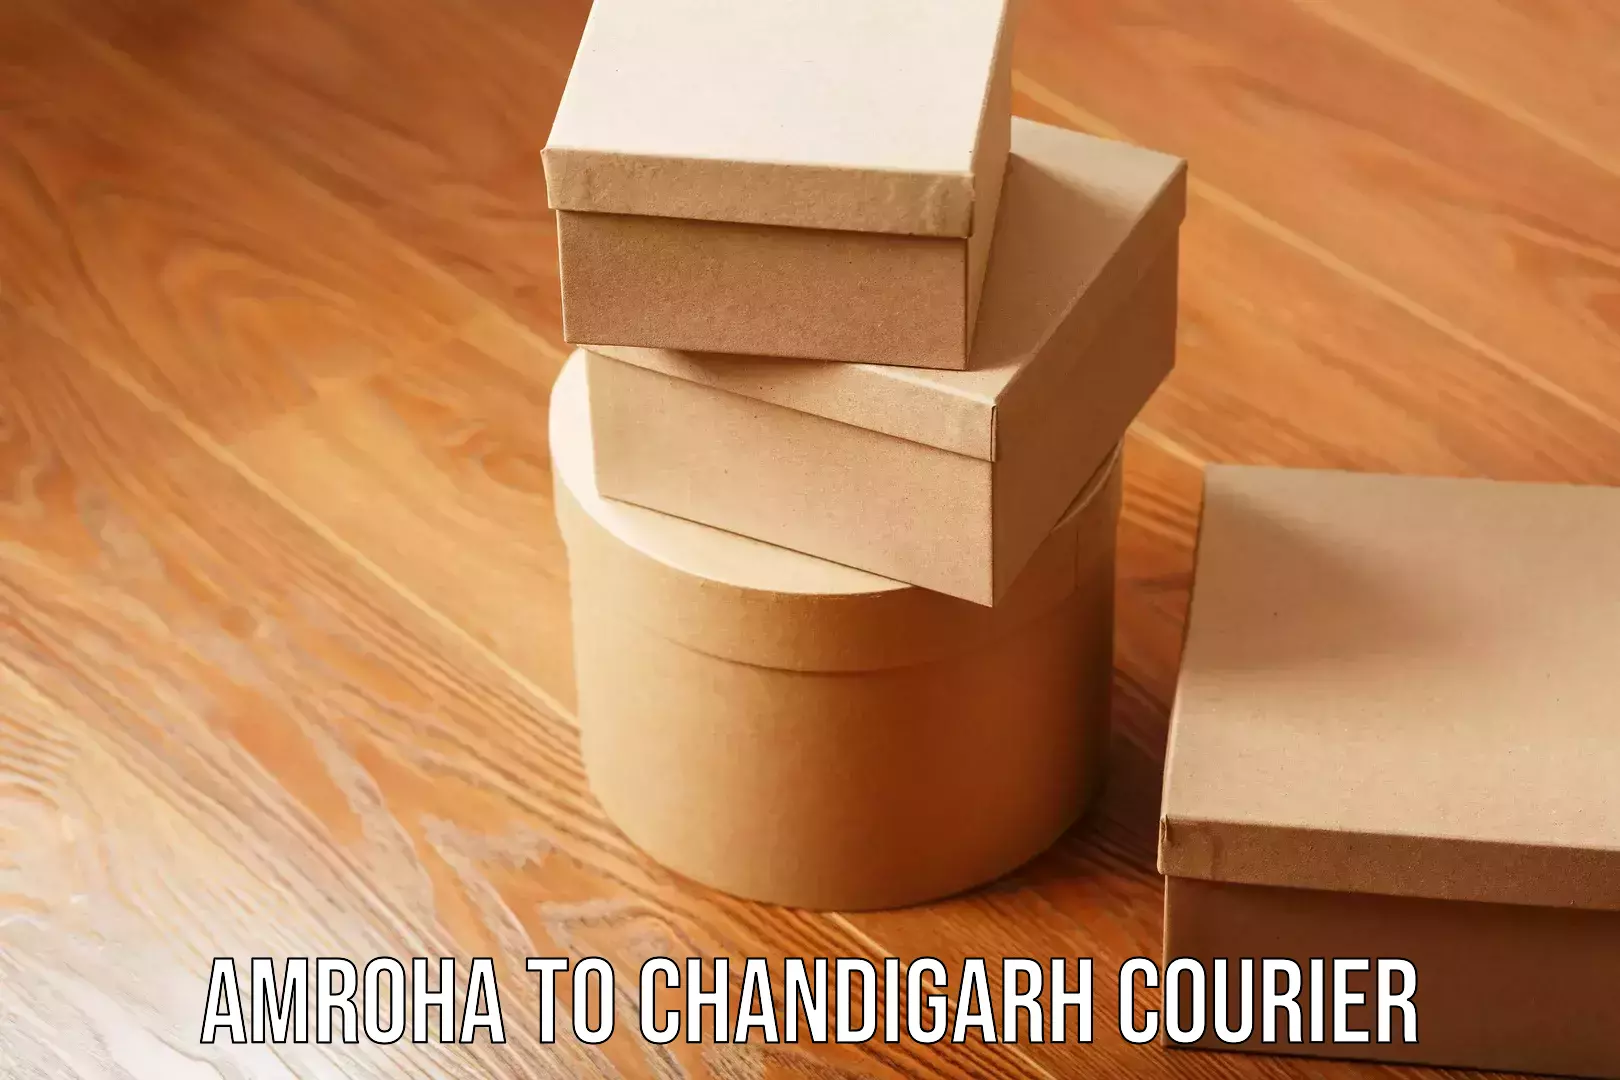 Courier service booking Amroha to Chandigarh